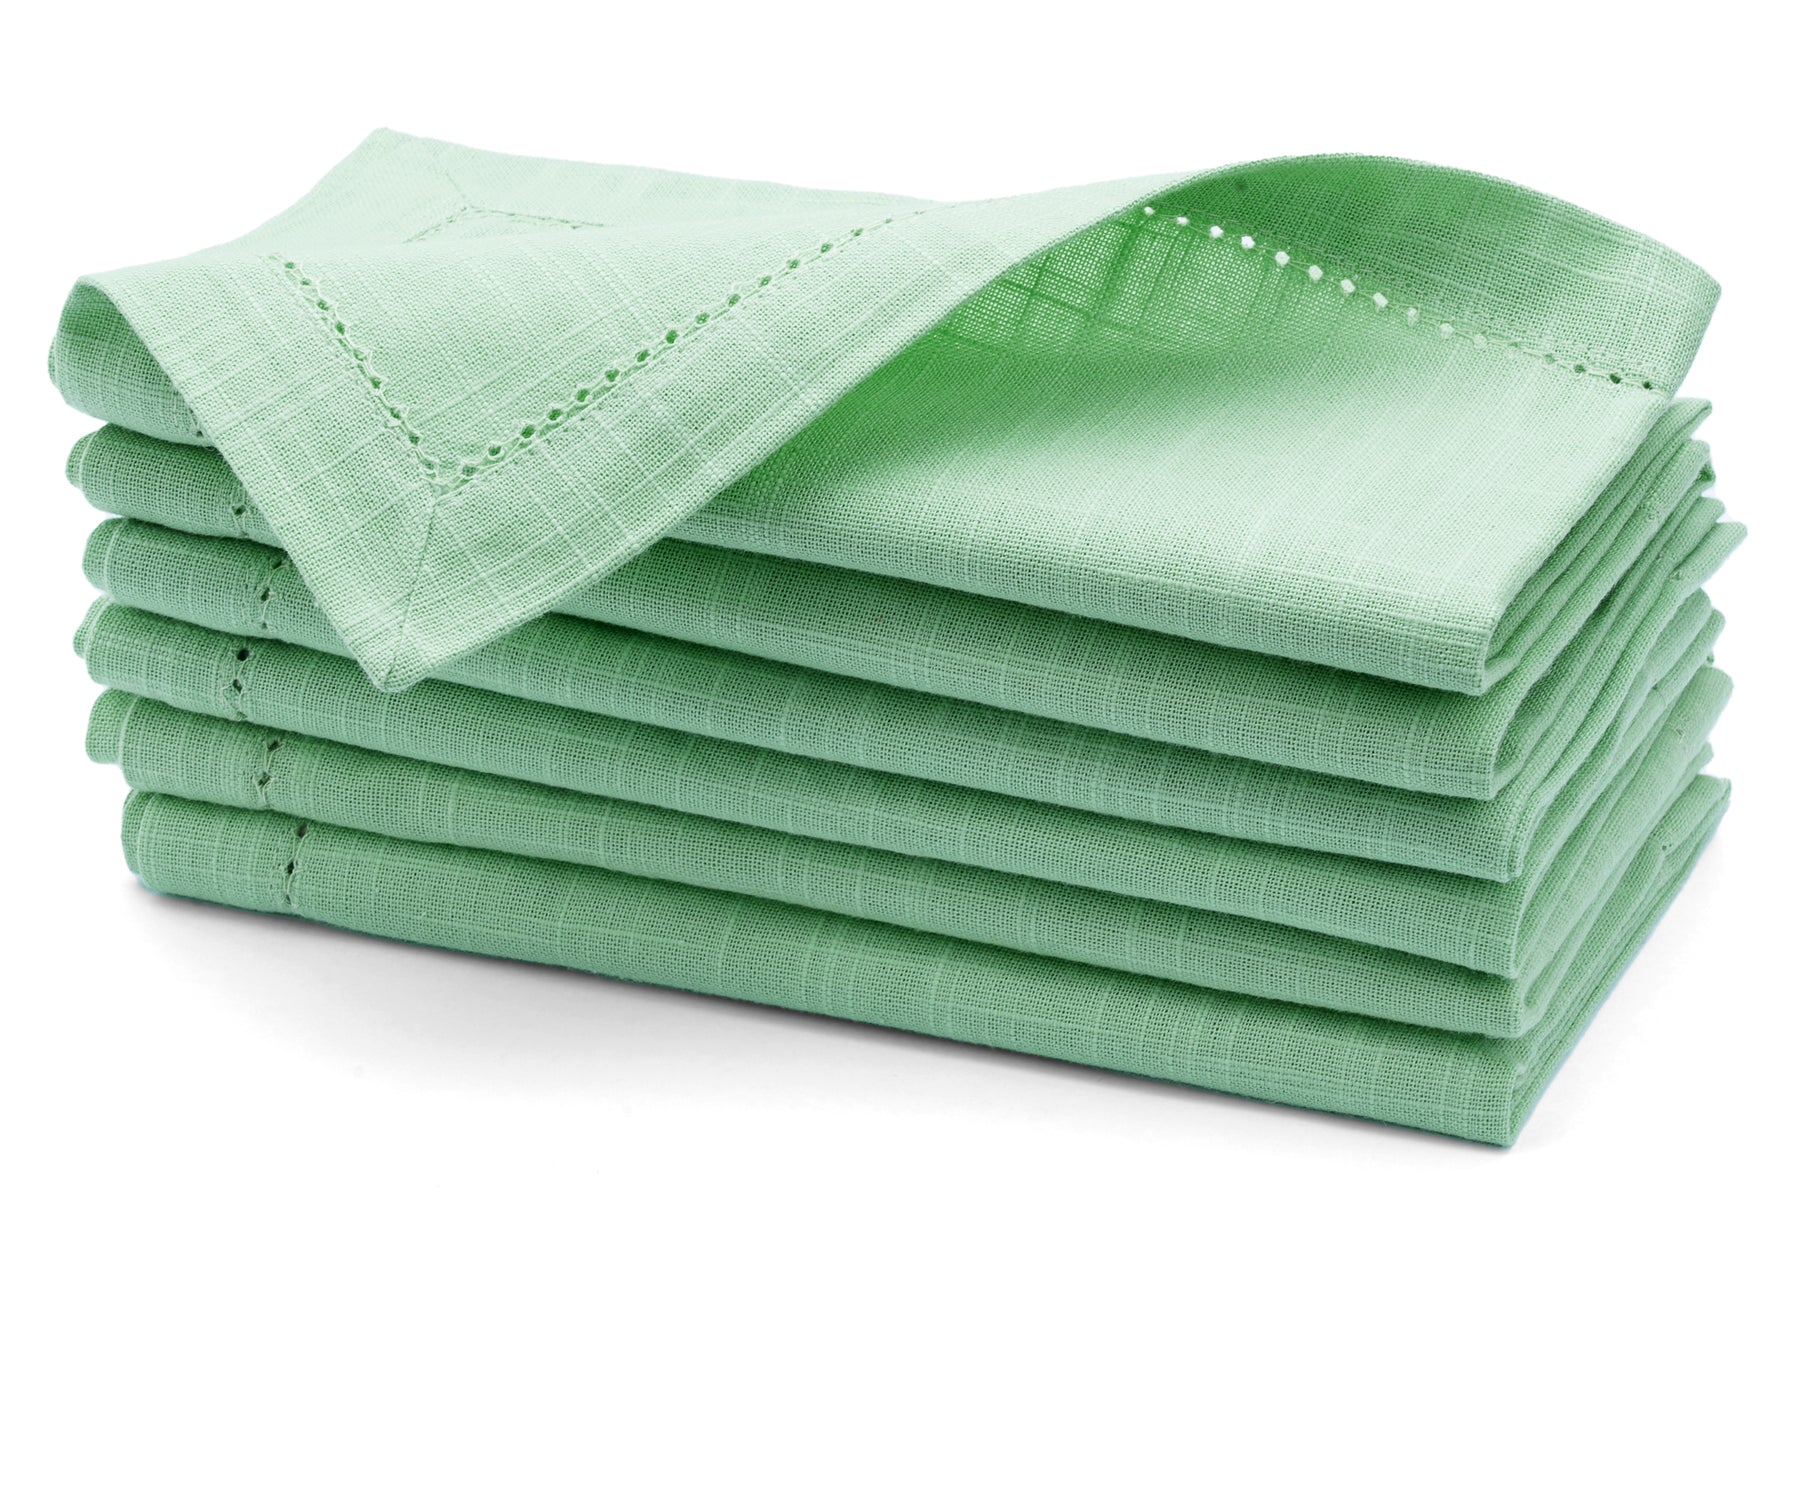 green napkins cloth are woven with cotton. cotton dinenr napkisn measures size of 18x18